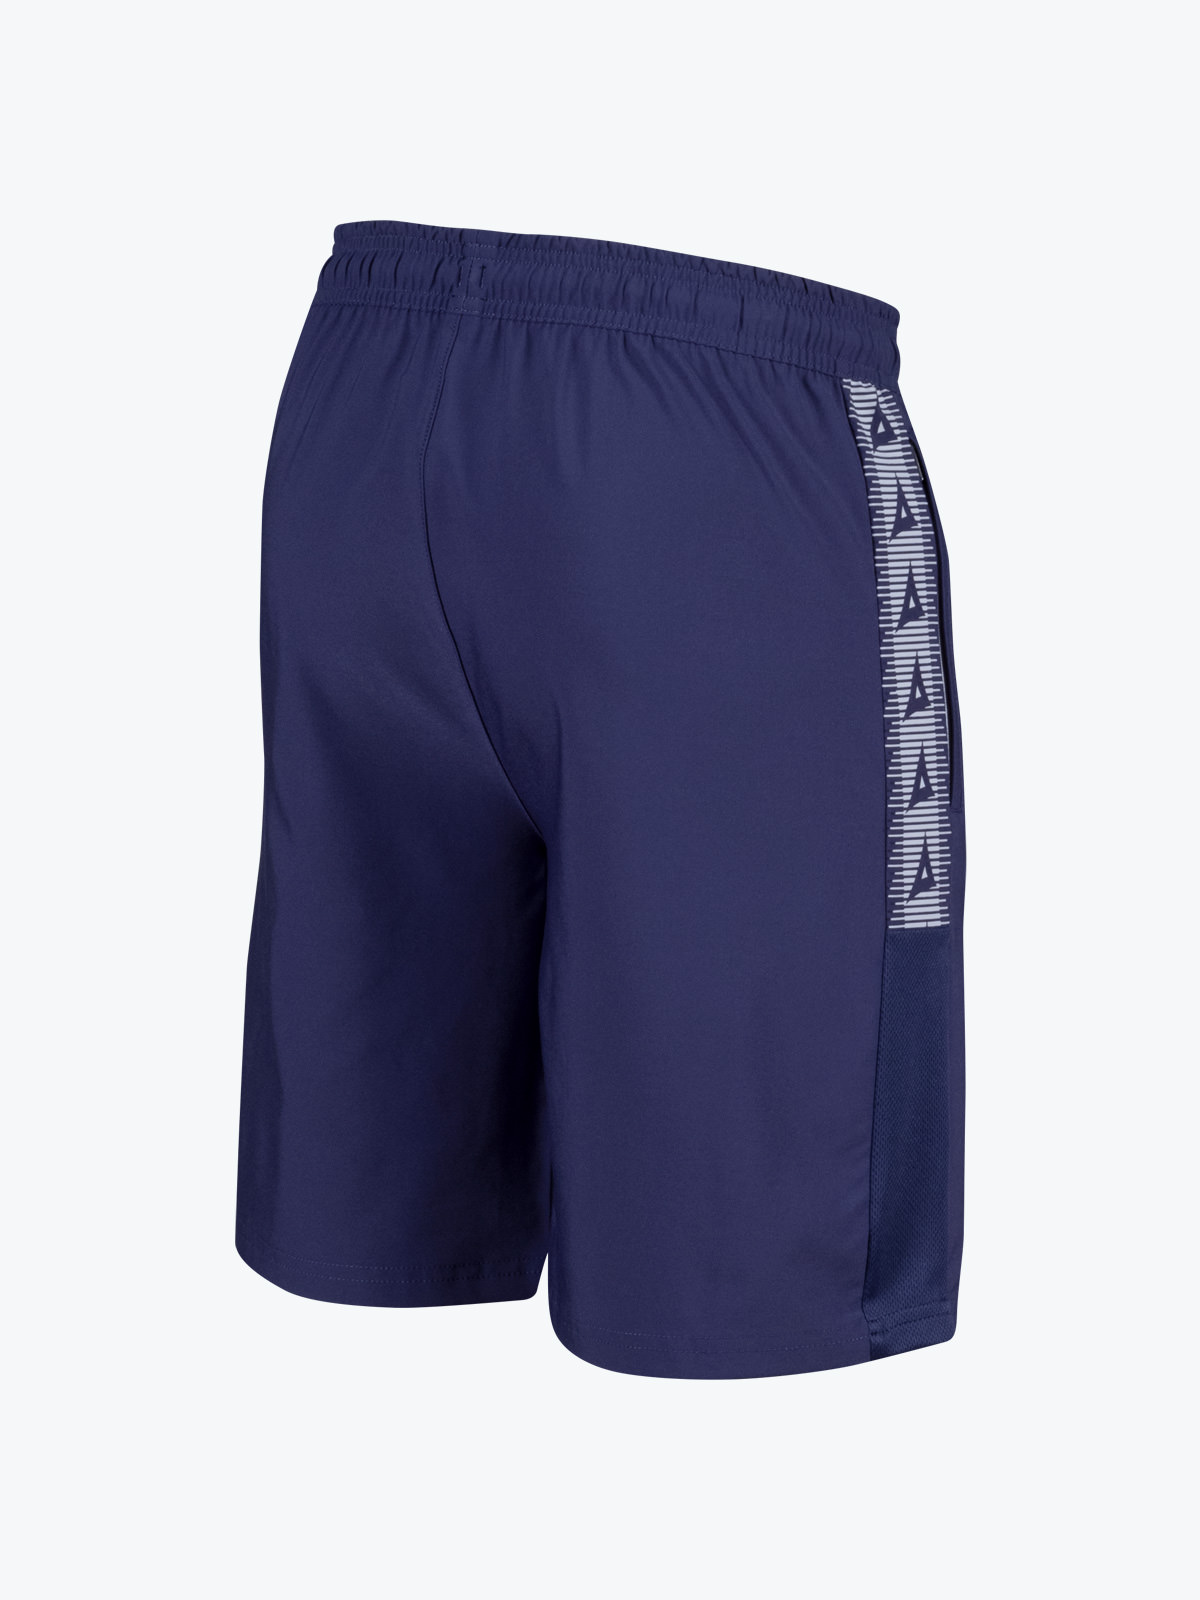 picture of enigma woven short - navy